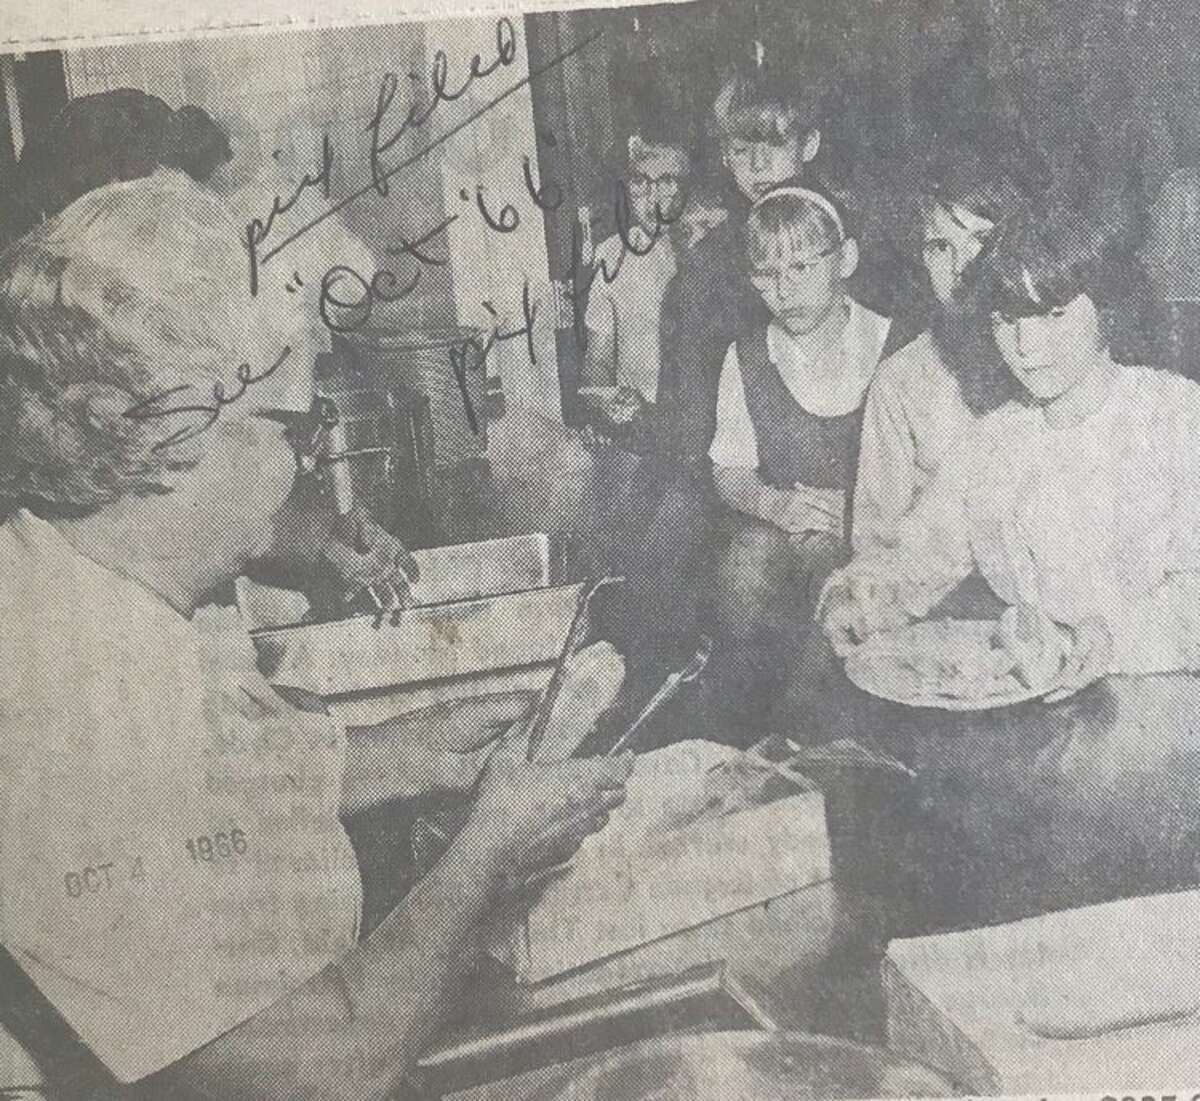 Pine River Elementary School opens its cafeteria serving hot lunches to about 200 students. The classrooms opened for use Sept. 6 but construction delays hindered the serving of hot lunches. Mrs. Walter Miller and Mrs. Joseph Pavka serve the lunches. The hot lunch program would start the next week at the new Floyd Elementary School. October 1966